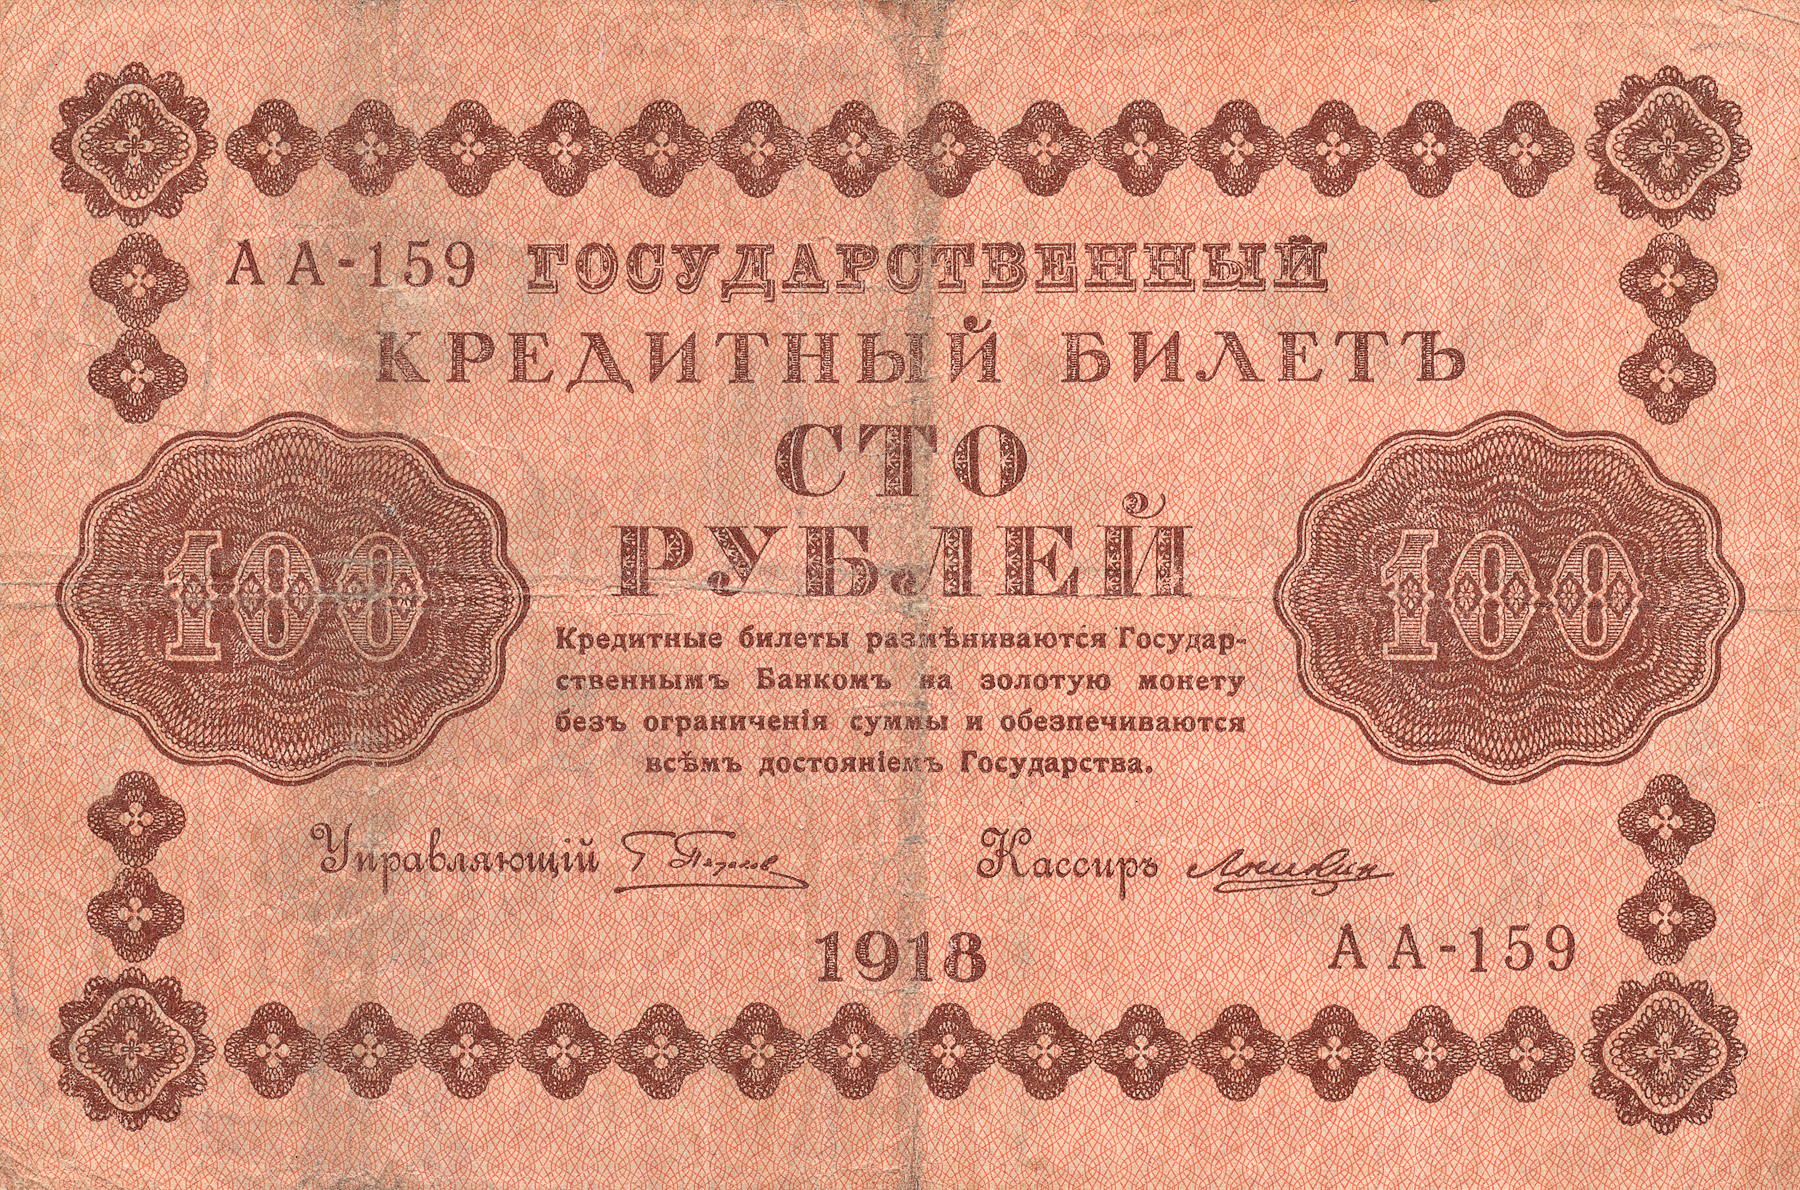 Vintage banknote - russia photo